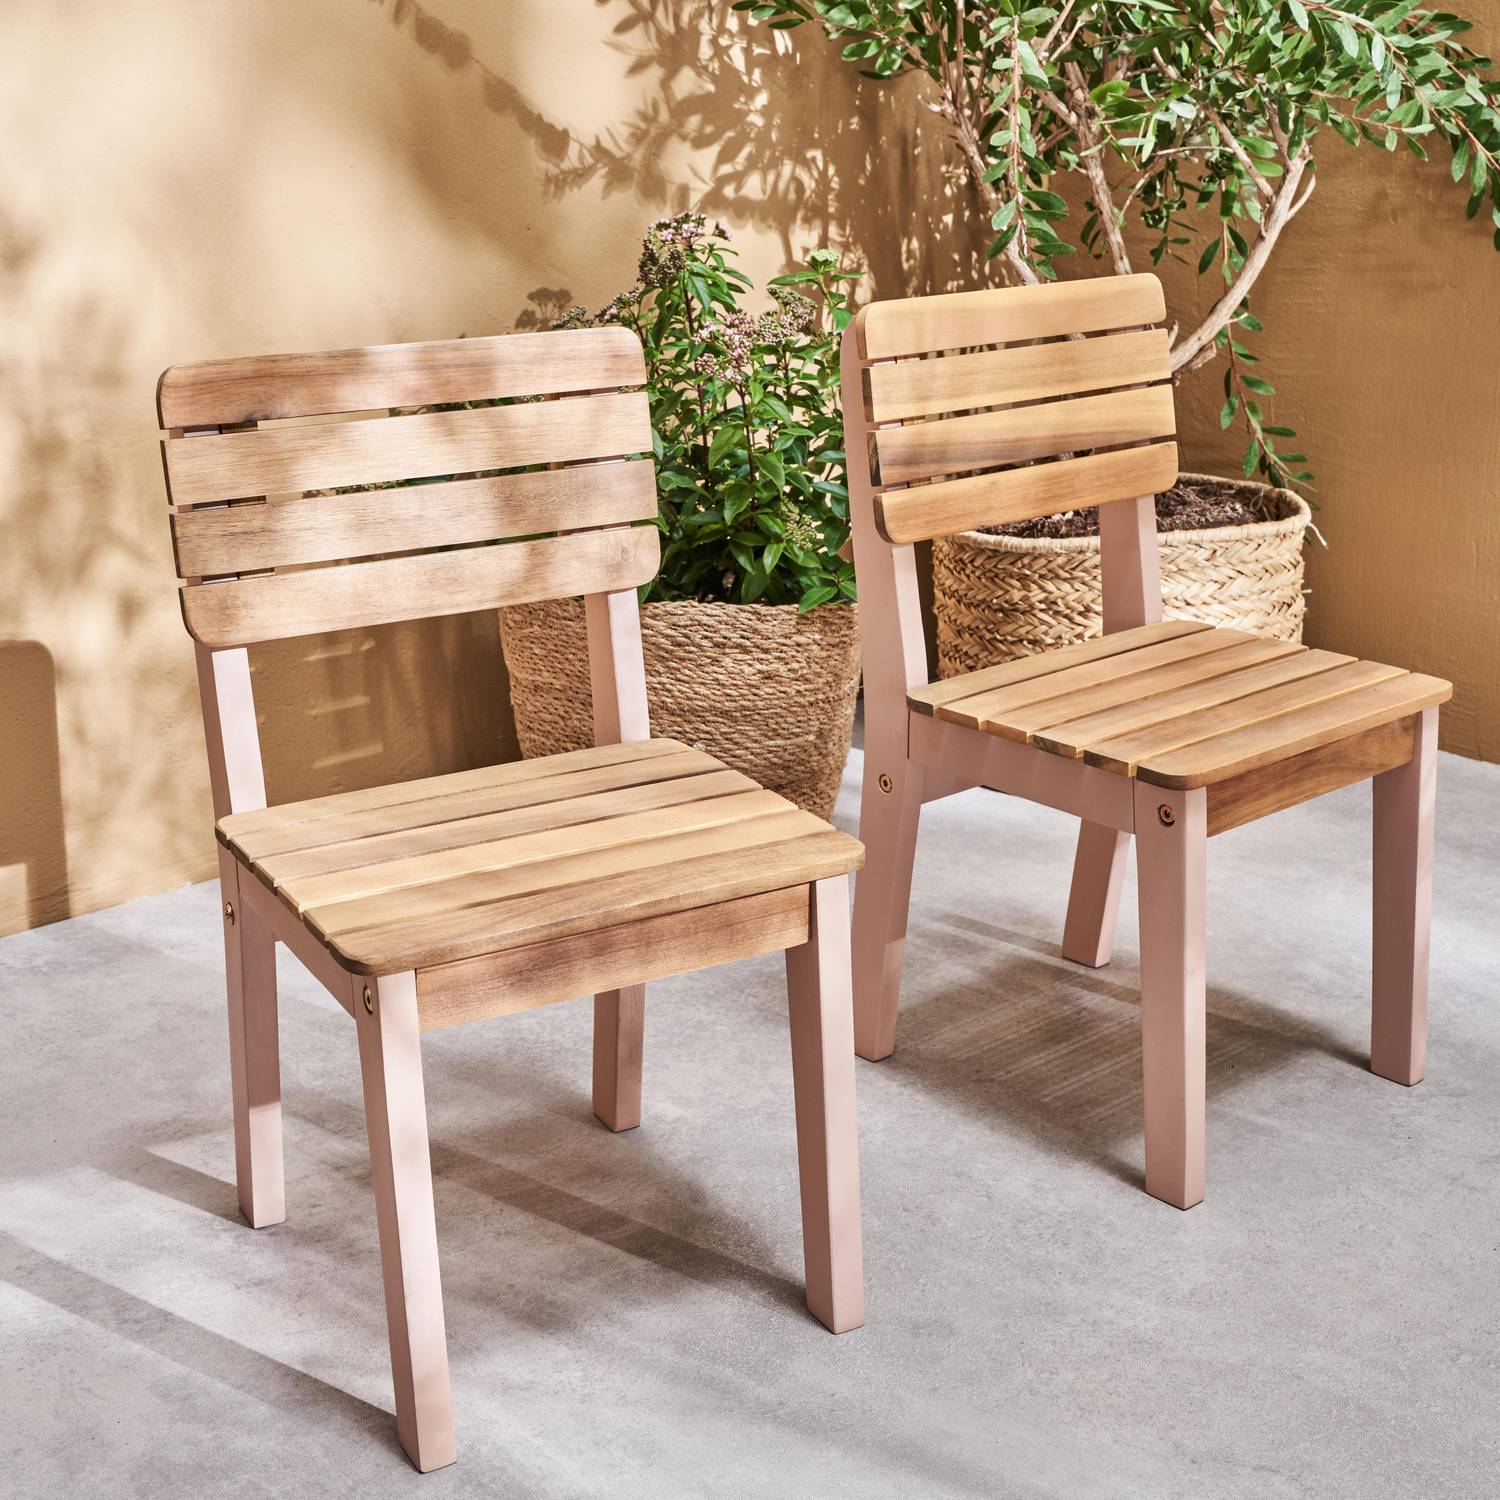 Solid Wood Chairs for Children, Indoor/Outdoor (Set of 2), pink, L29 x D31.5 x H53 cm Photo2